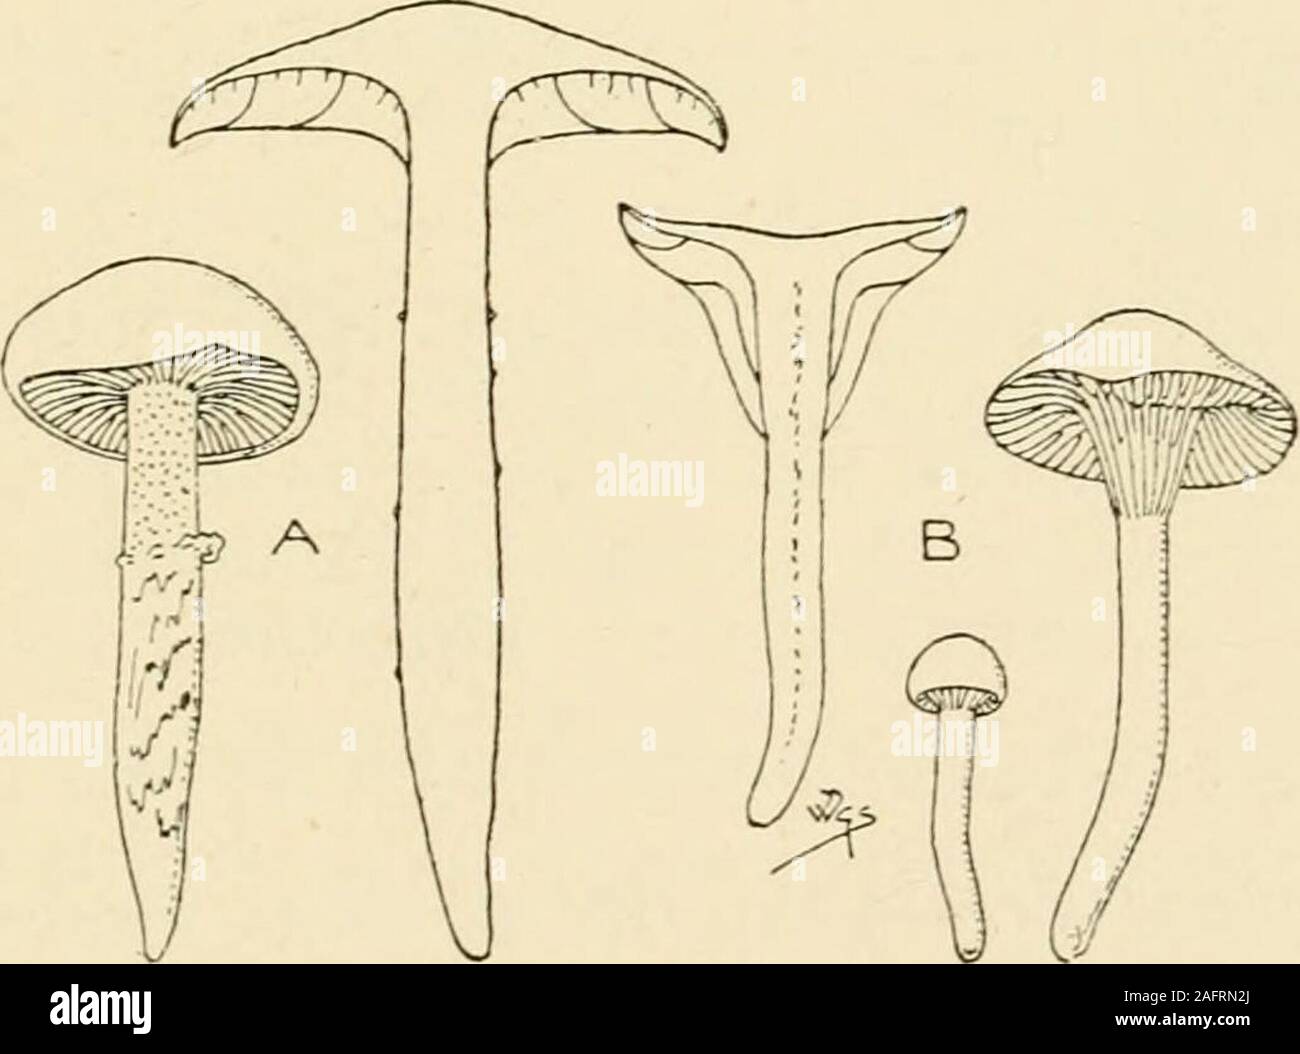 . Synopsis of the British Basidiomycetes ; a descriptive catalogue of the drawings and specimens in the Department of botany, British museum. llow. P. conchato - dimidiate, imbricate ; marg. subinvolute. St. obsolete. G. decurrent to base, crowded, branched and anastomosing, trama well developed, tan-sienna or somewhat pale yellow-ochre, sometimes studded with drops. Beech, fir, hawthorn, sawdust, in cellars, on wood ; uncommon. July-Nov.Diana. 4 in. P. sometimes whitish-ochre with reddish marg. G. sienna.The resupinate and cup-shaped form is Gomphus pezizoides Pers. 1186. P. Fagi B. & Br. (fr Stock Photo